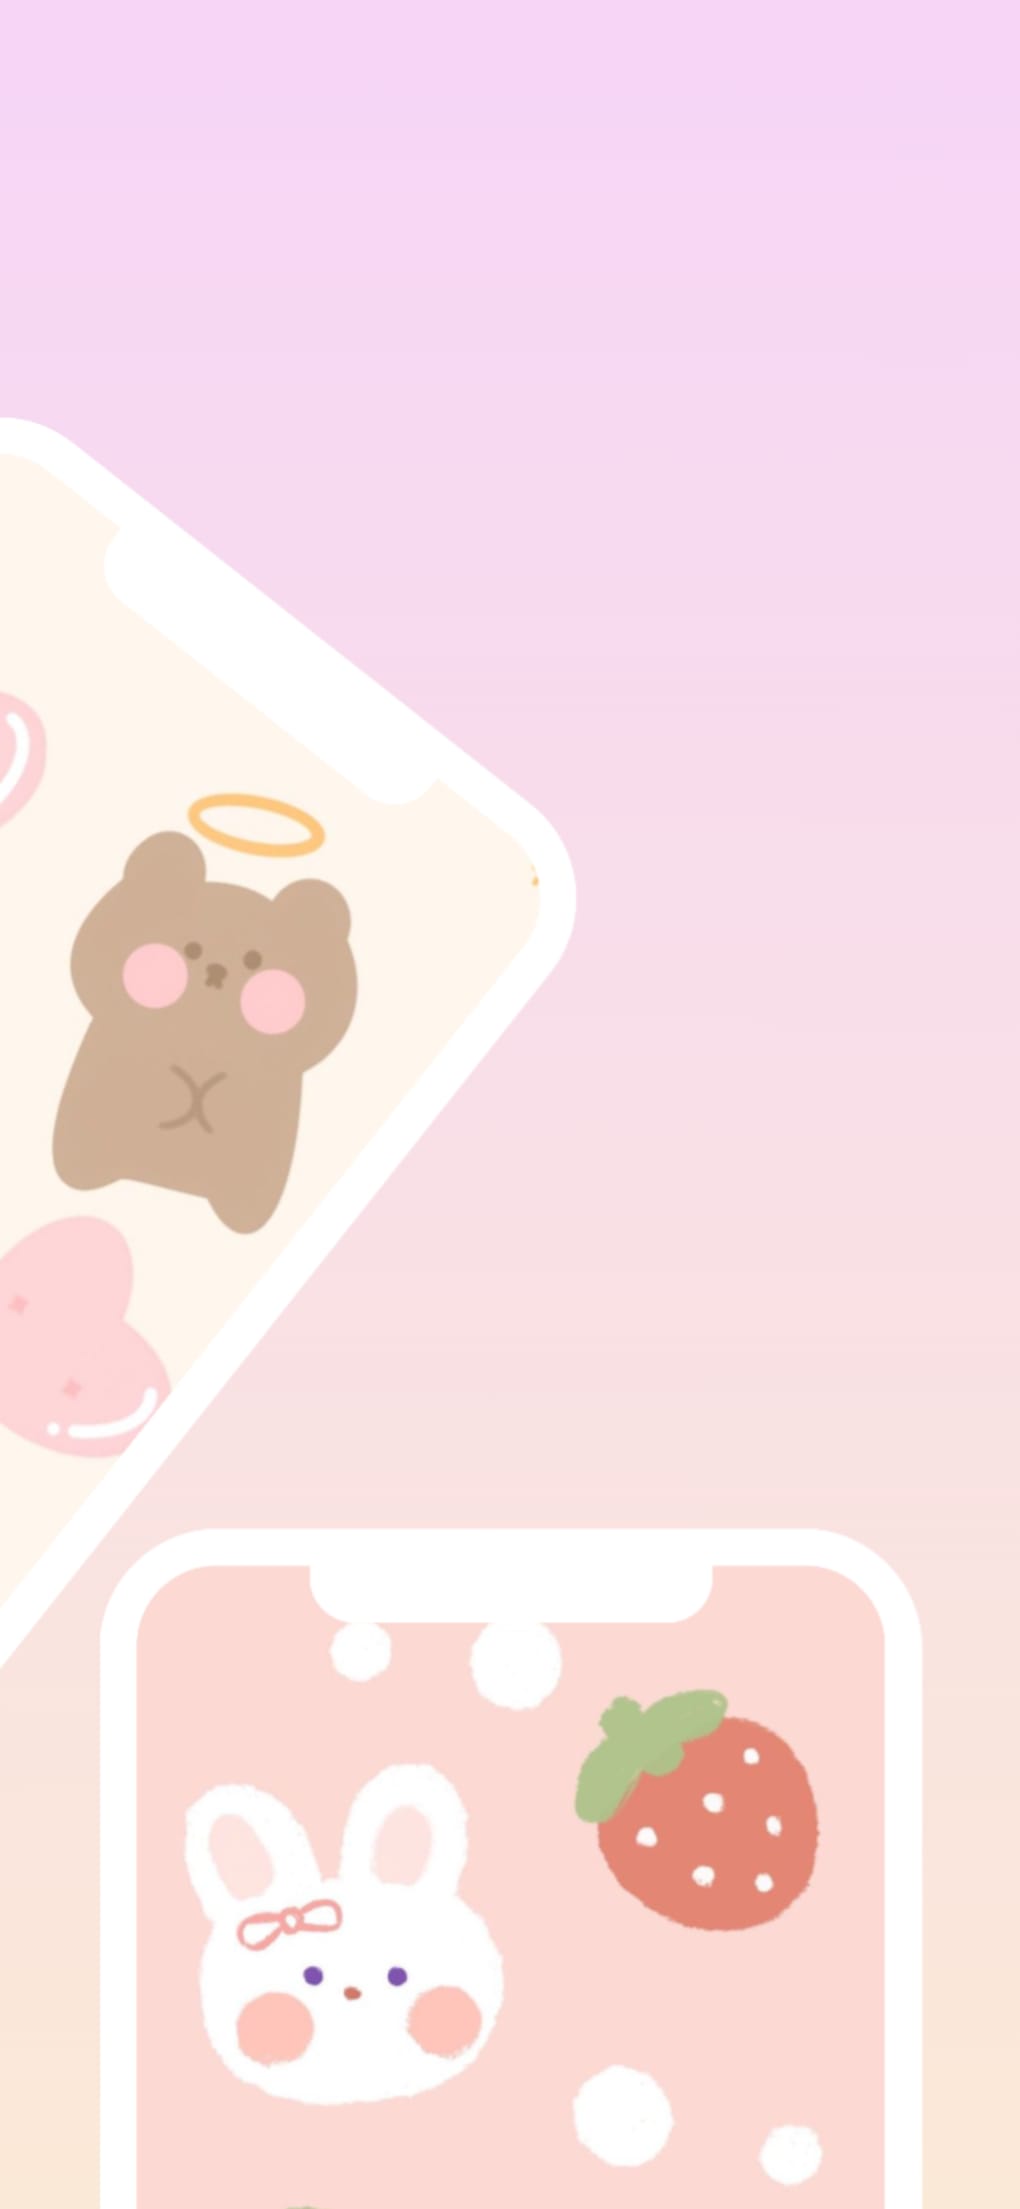 Kawaii Aesthetic Wallpaper for Android